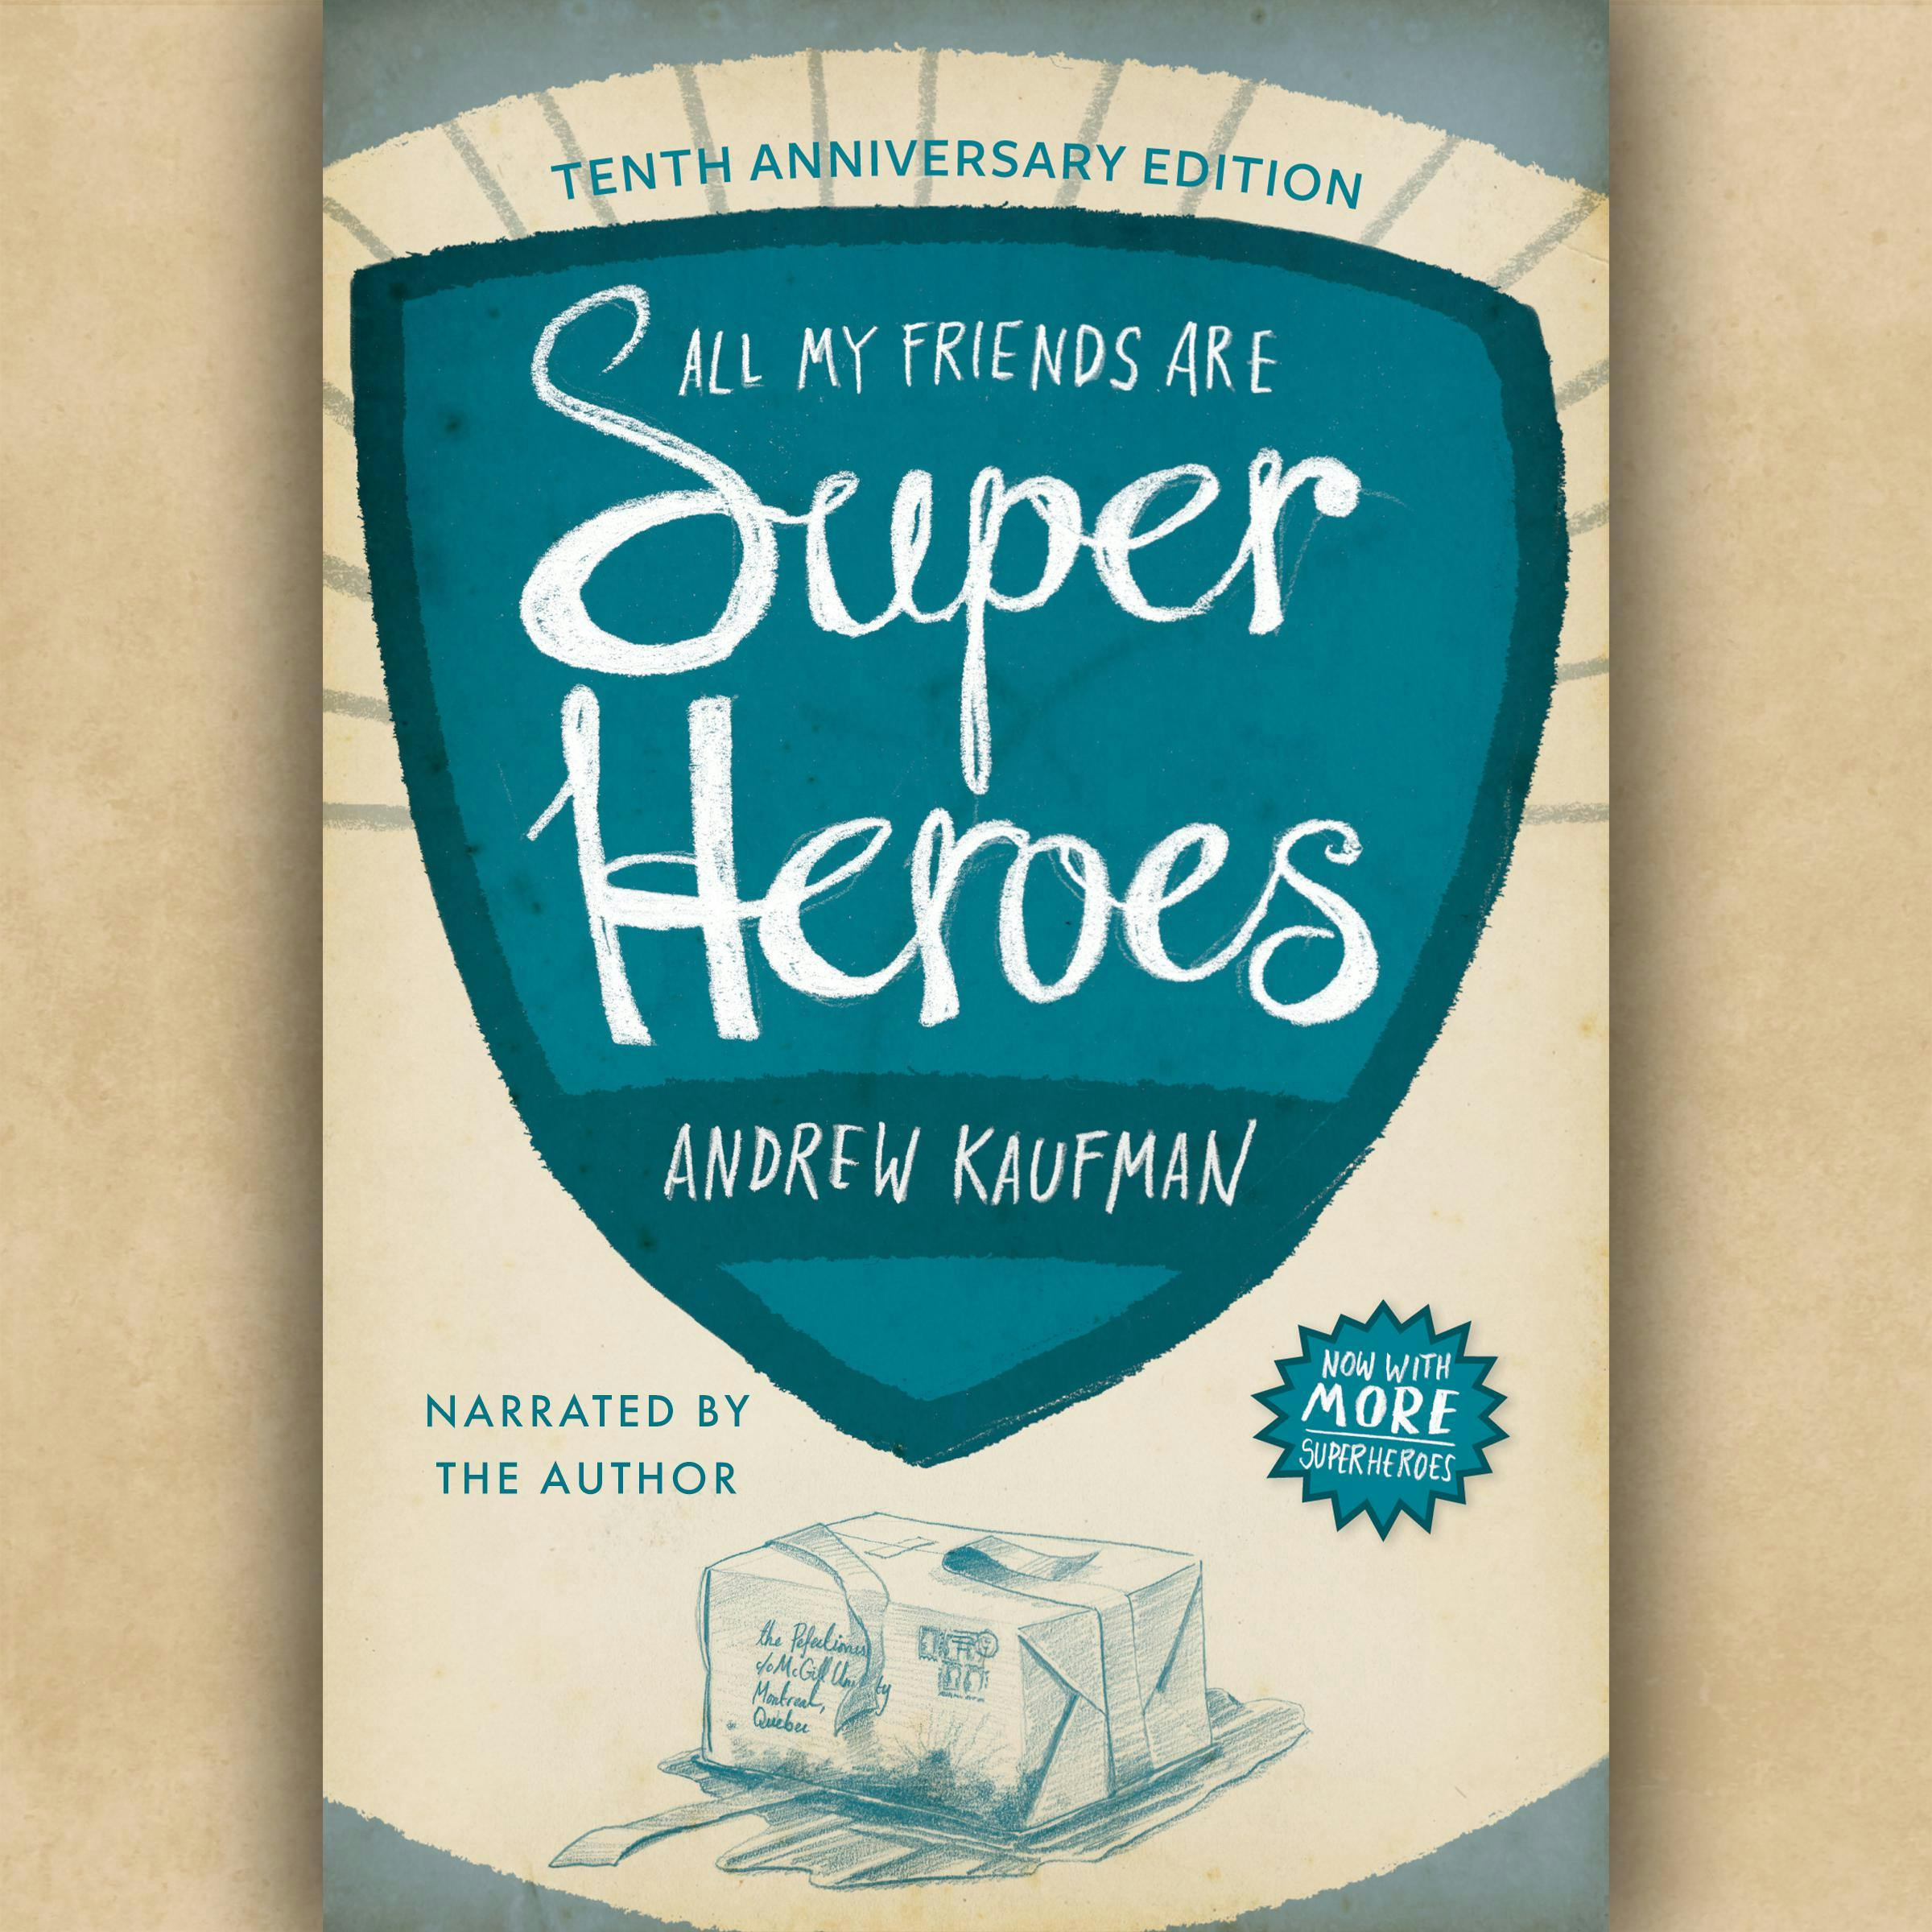 All My Friends Are Superheroes - Andrew Kaufman